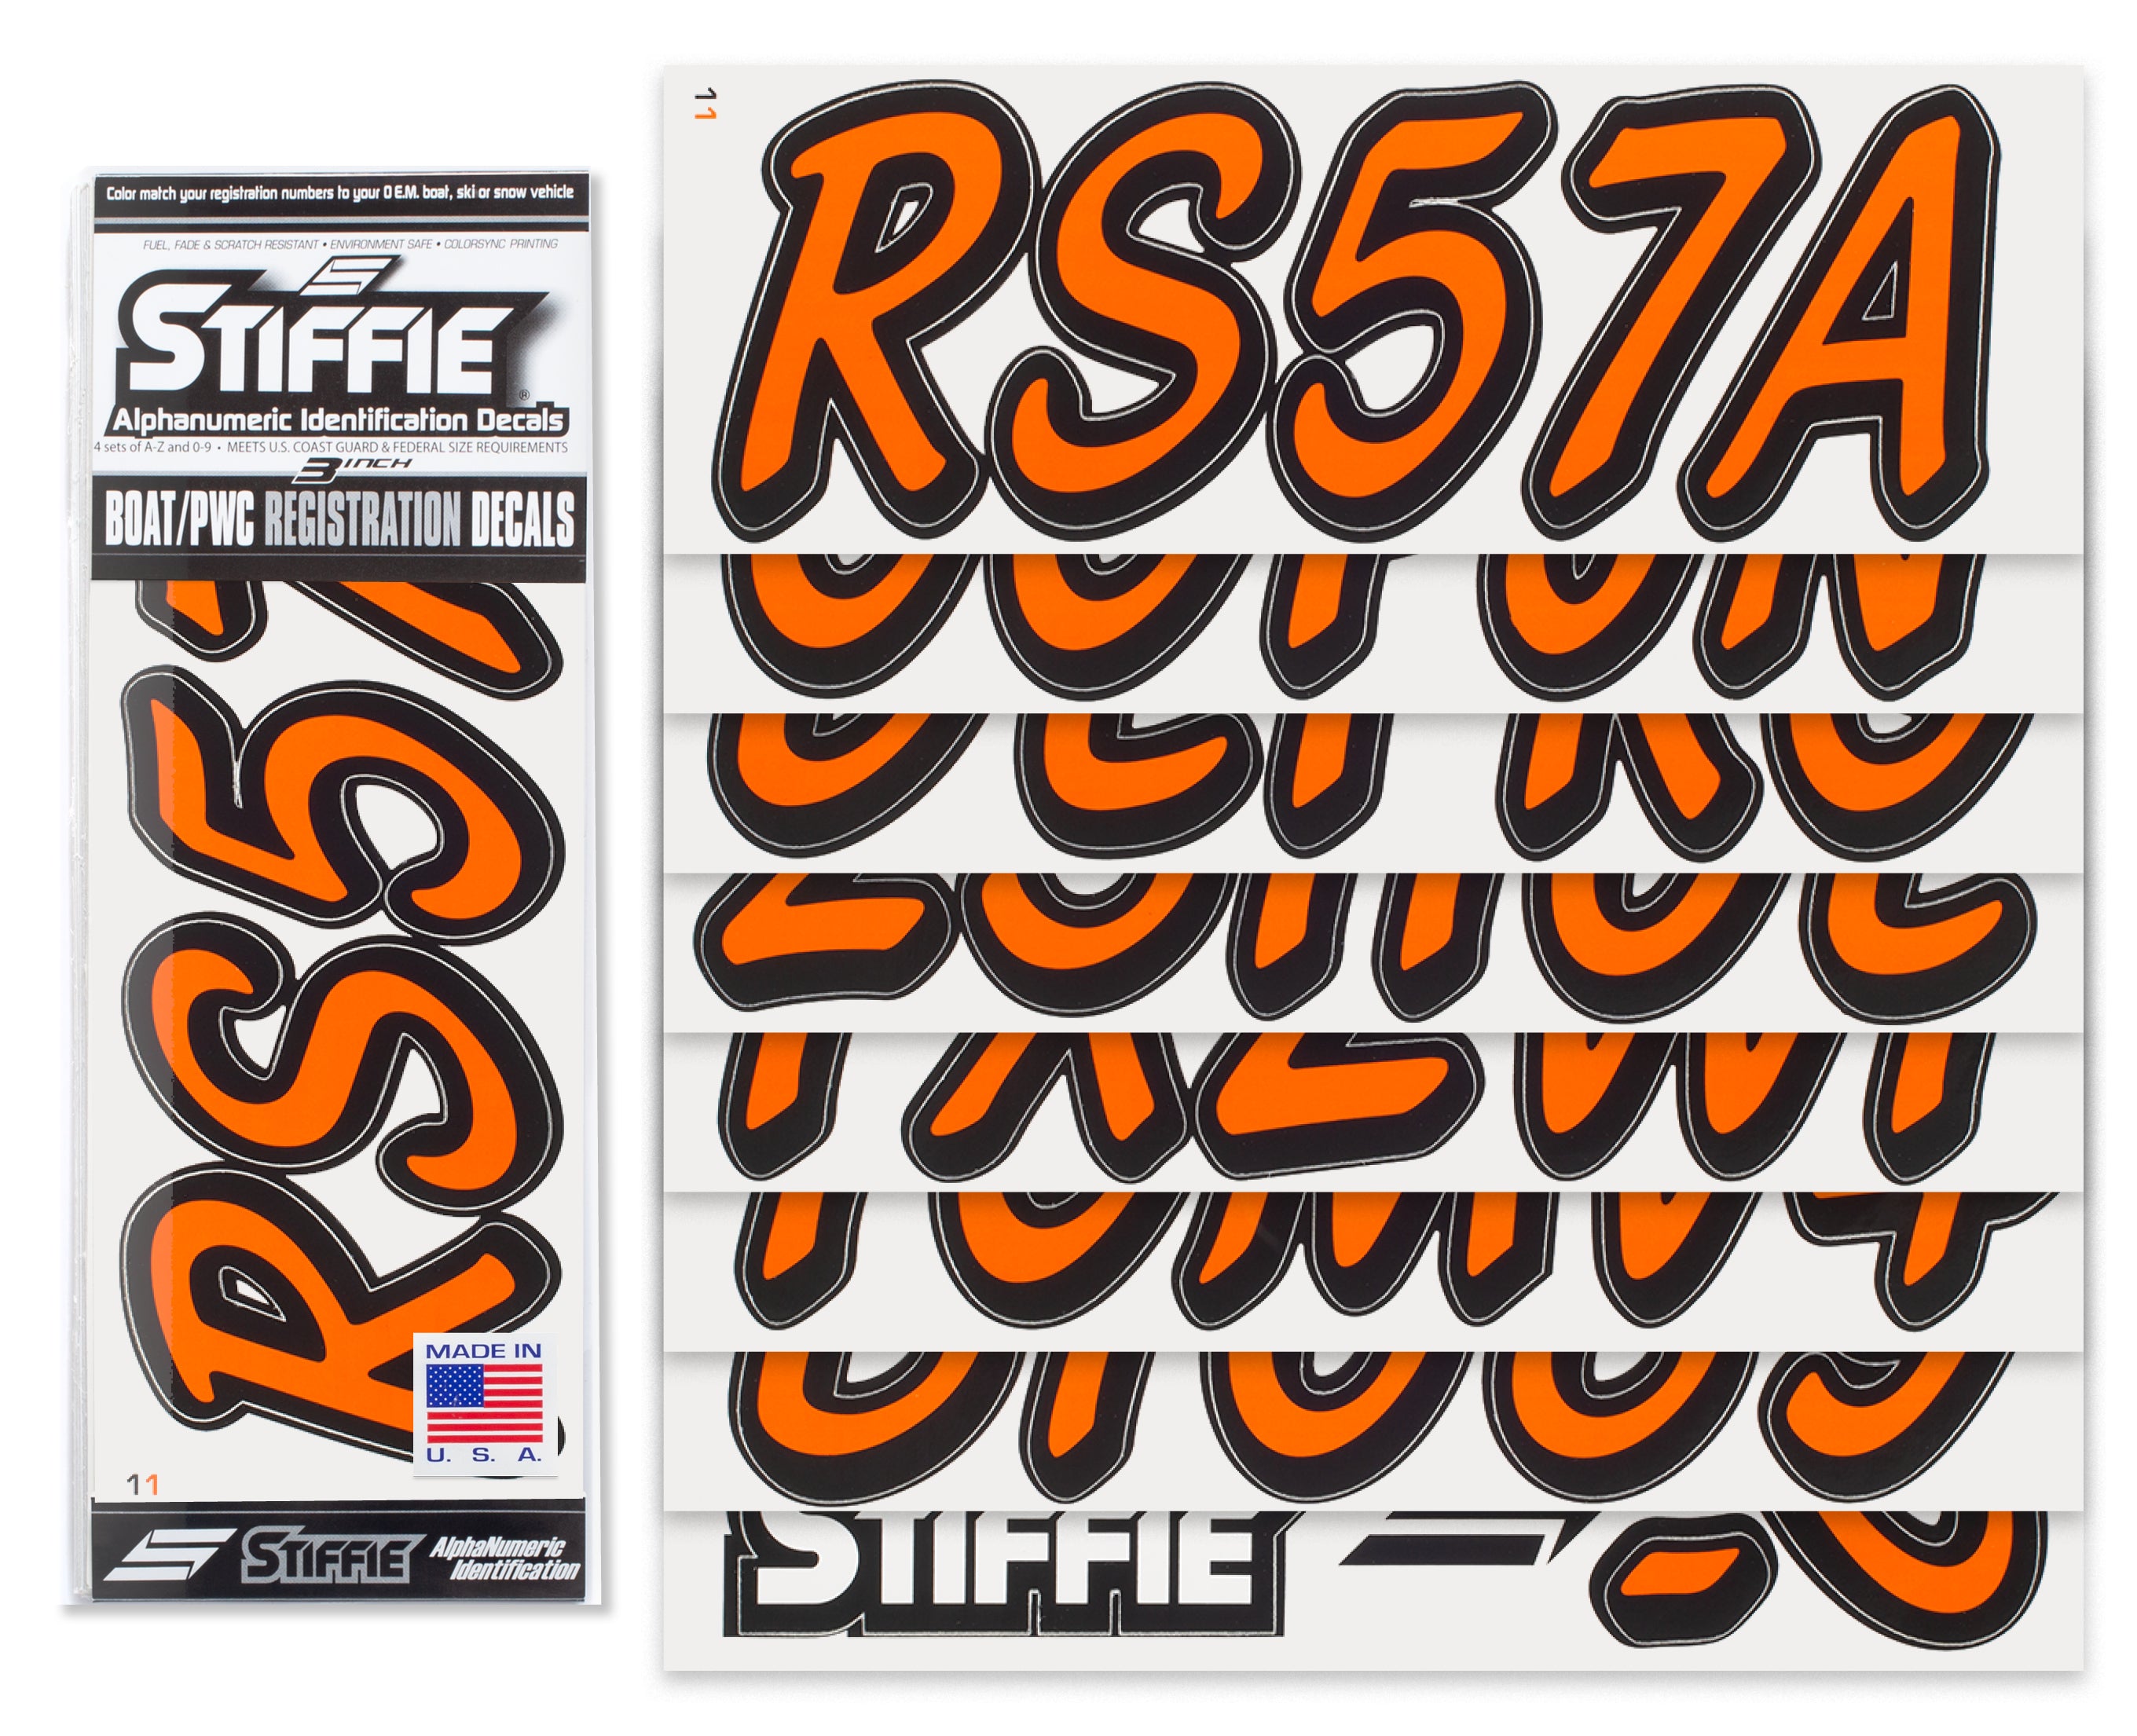 STIFFIE Whipline Solid Orange/Black 3" Alpha-Numeric Registration Identification Numbers Stickers Decals for Boats & Personal Watercraft